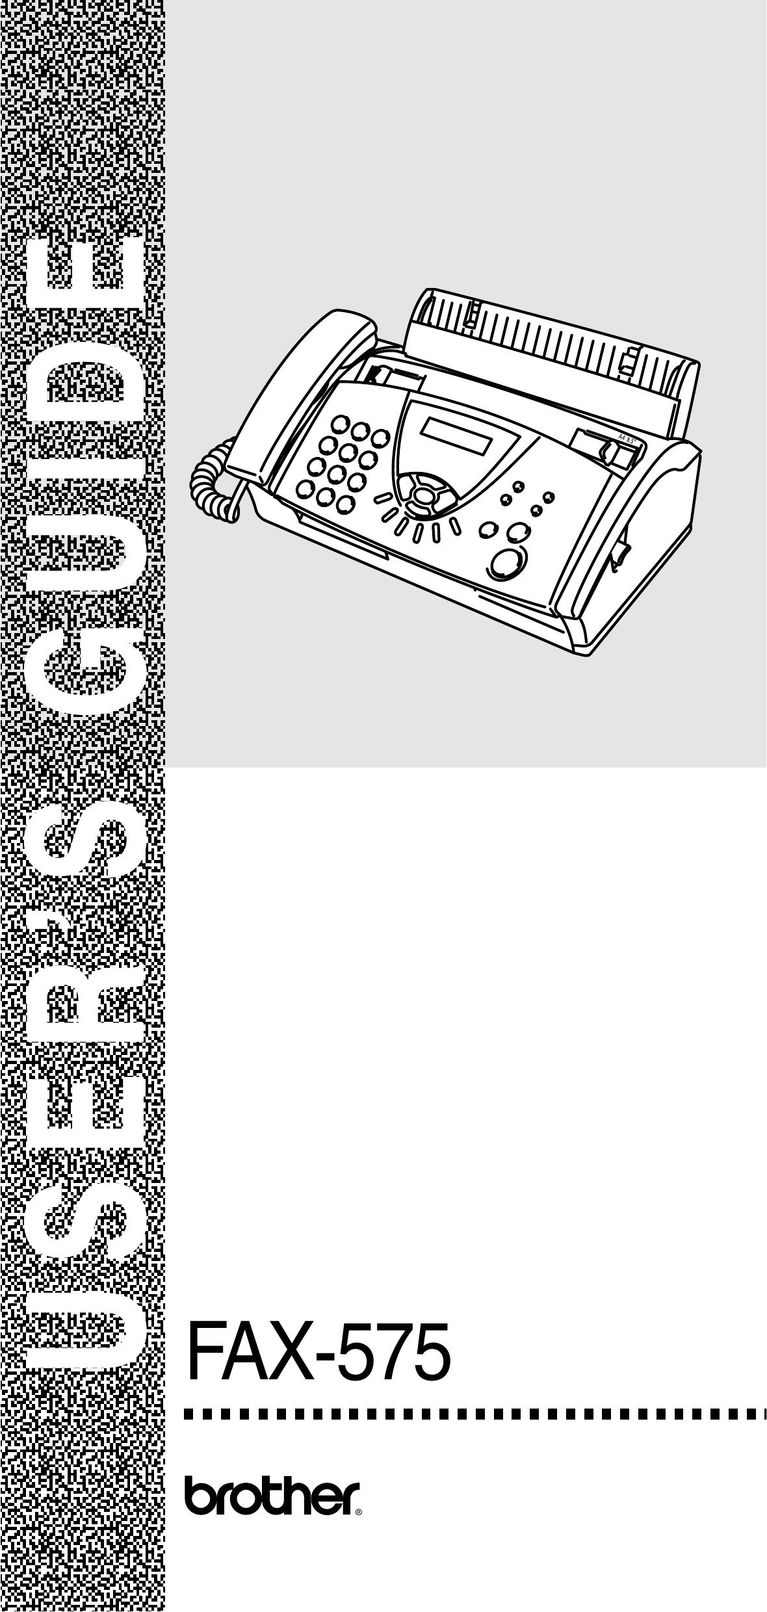 Brother 575 Fax Machine User Manual